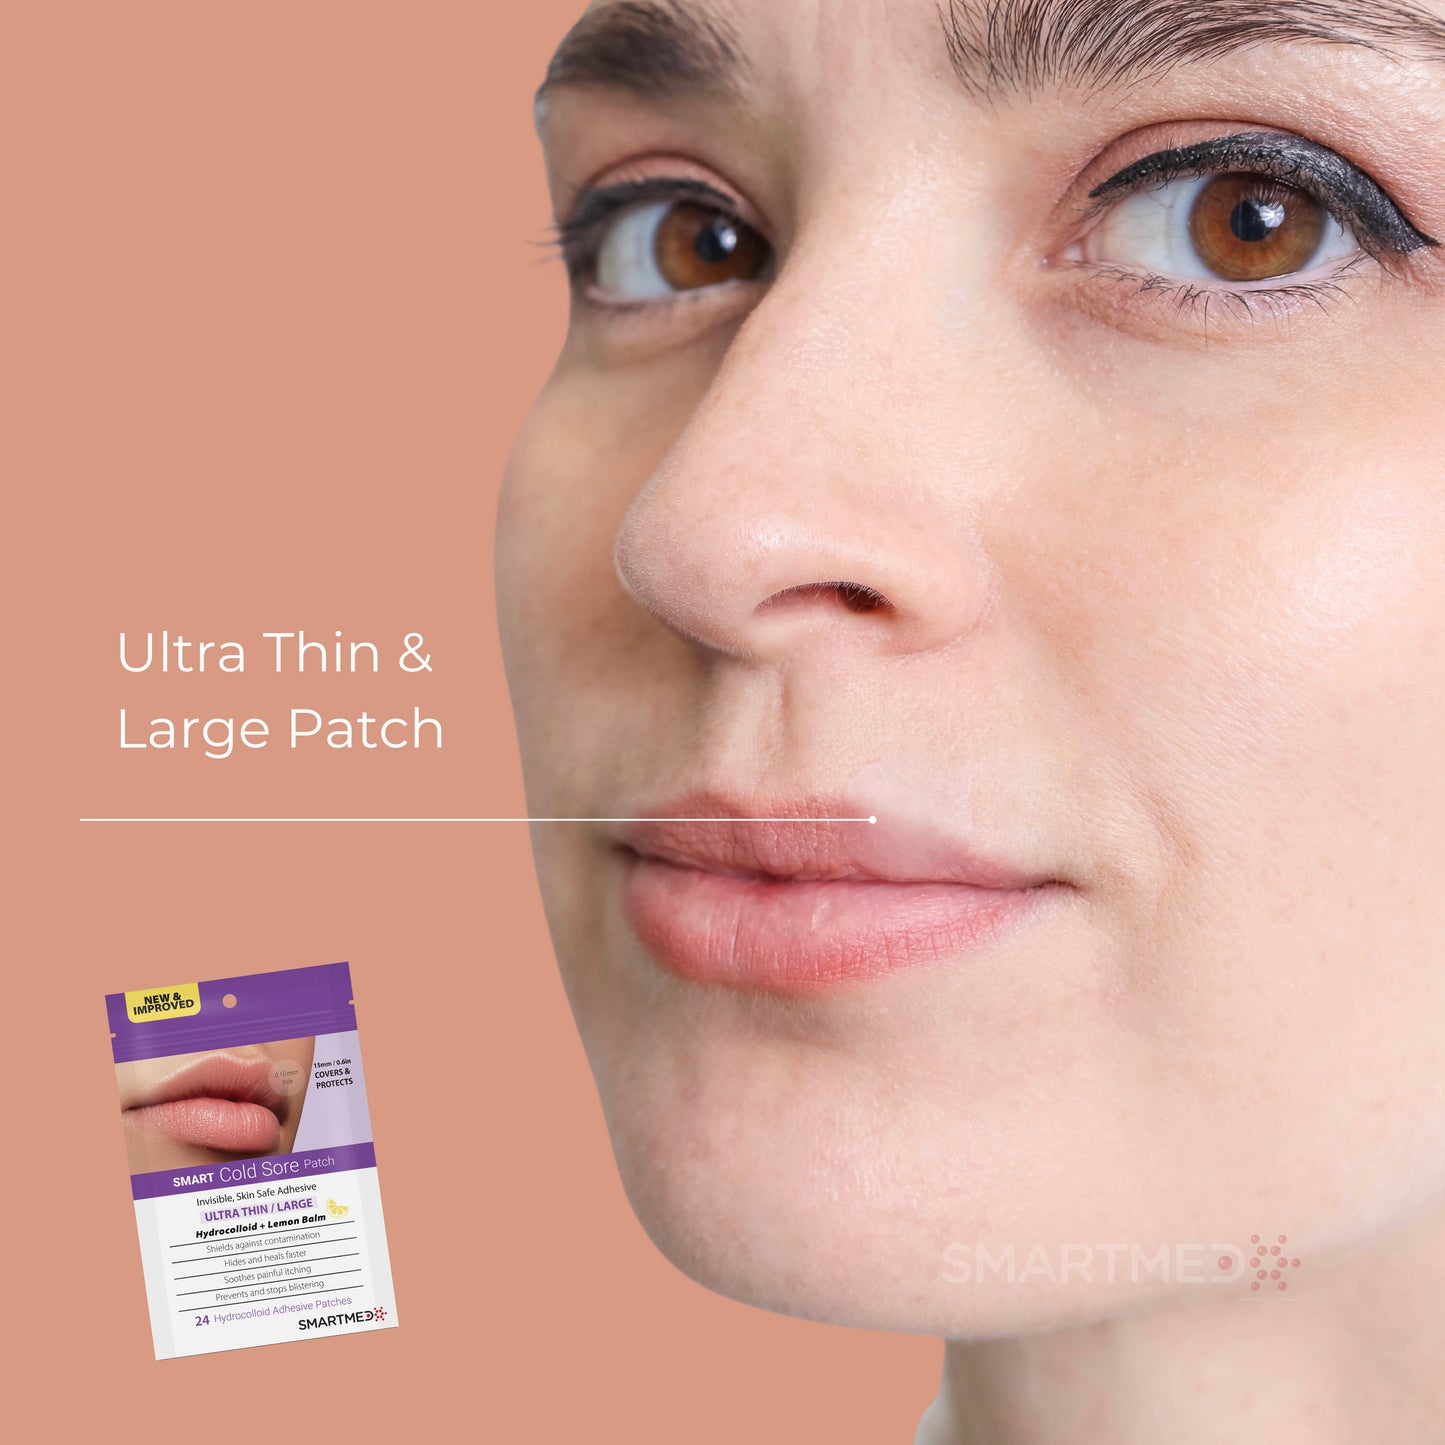 Cold Sore Ultra Thin Large Hydrocolloid Patches with Lemon Balm 24 Patches 15mm - Image of Patch on Lips